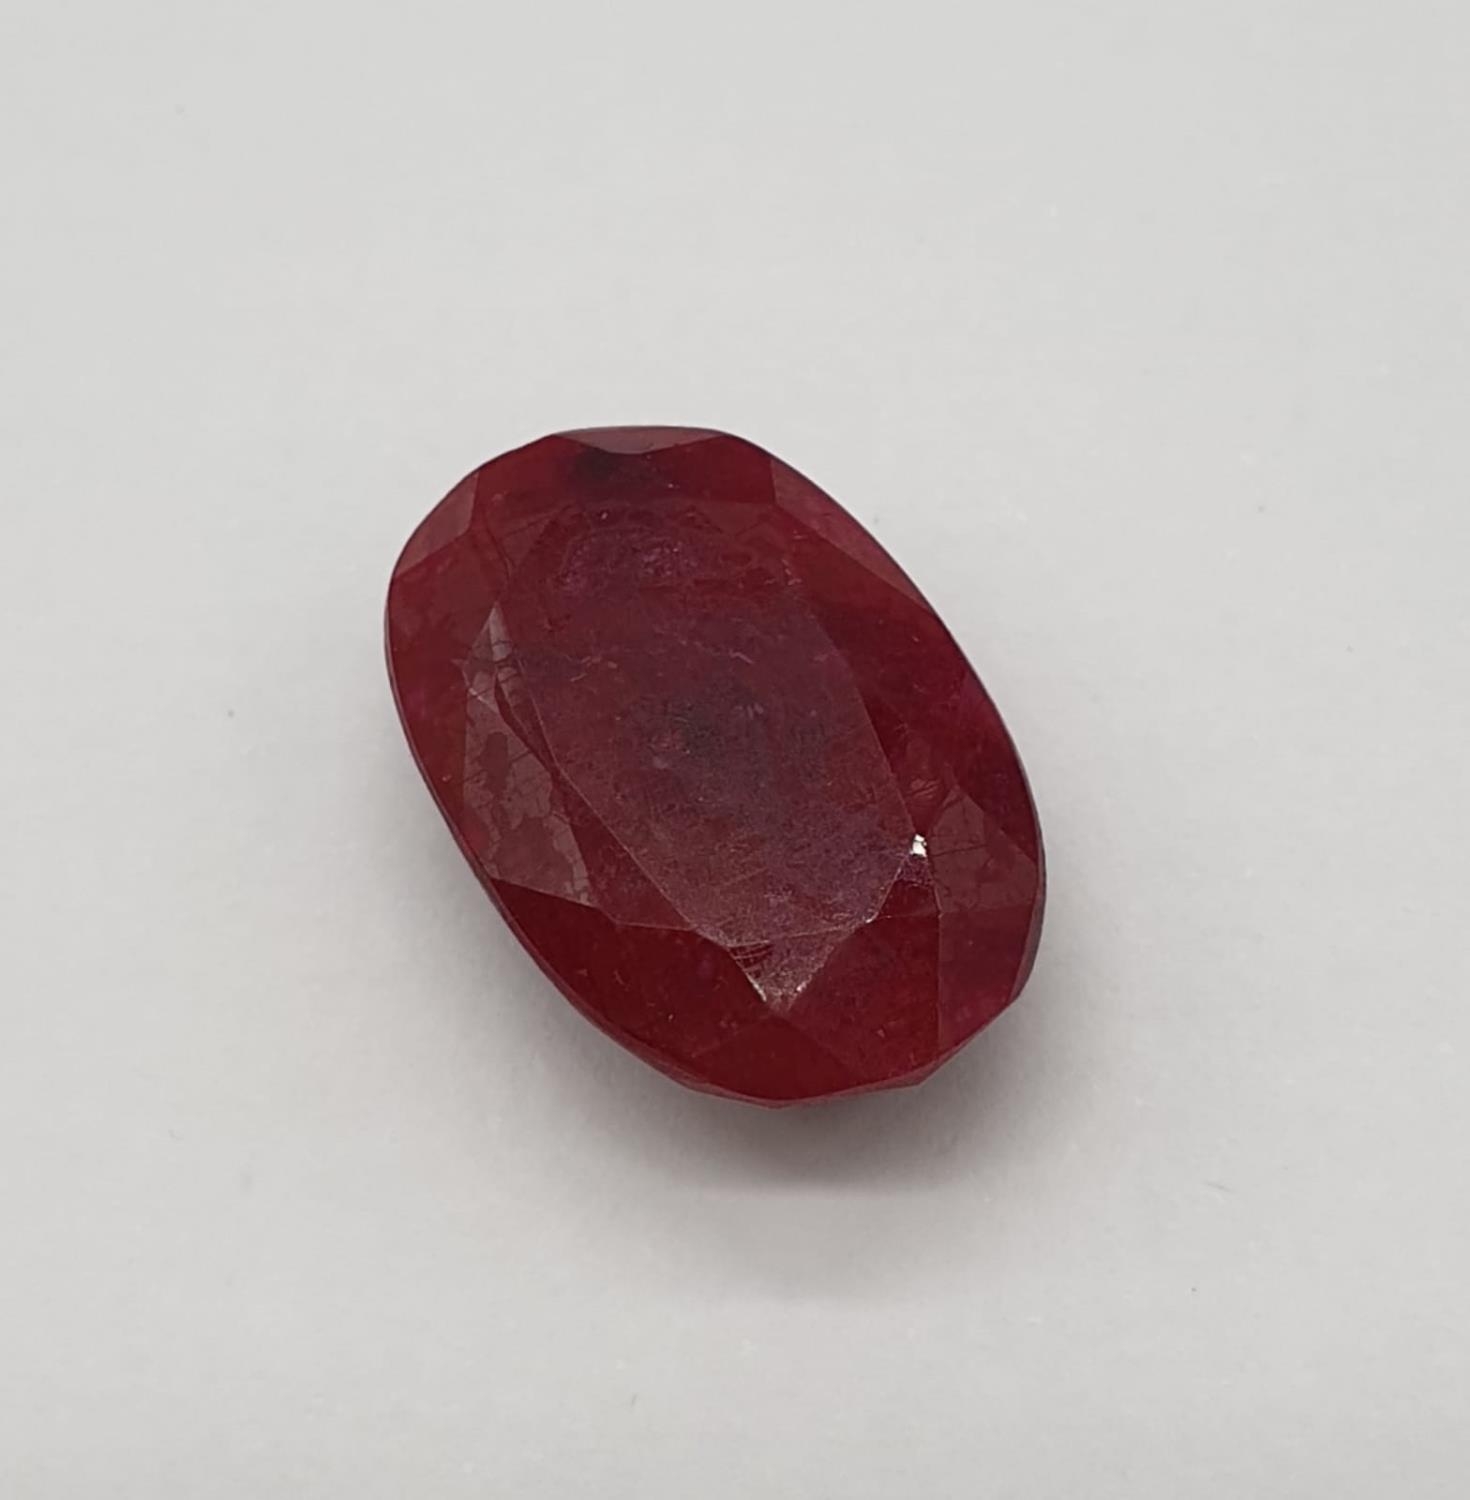 13.68ct Ruby Gemstone IDT CERTIFICATED - Image 2 of 5